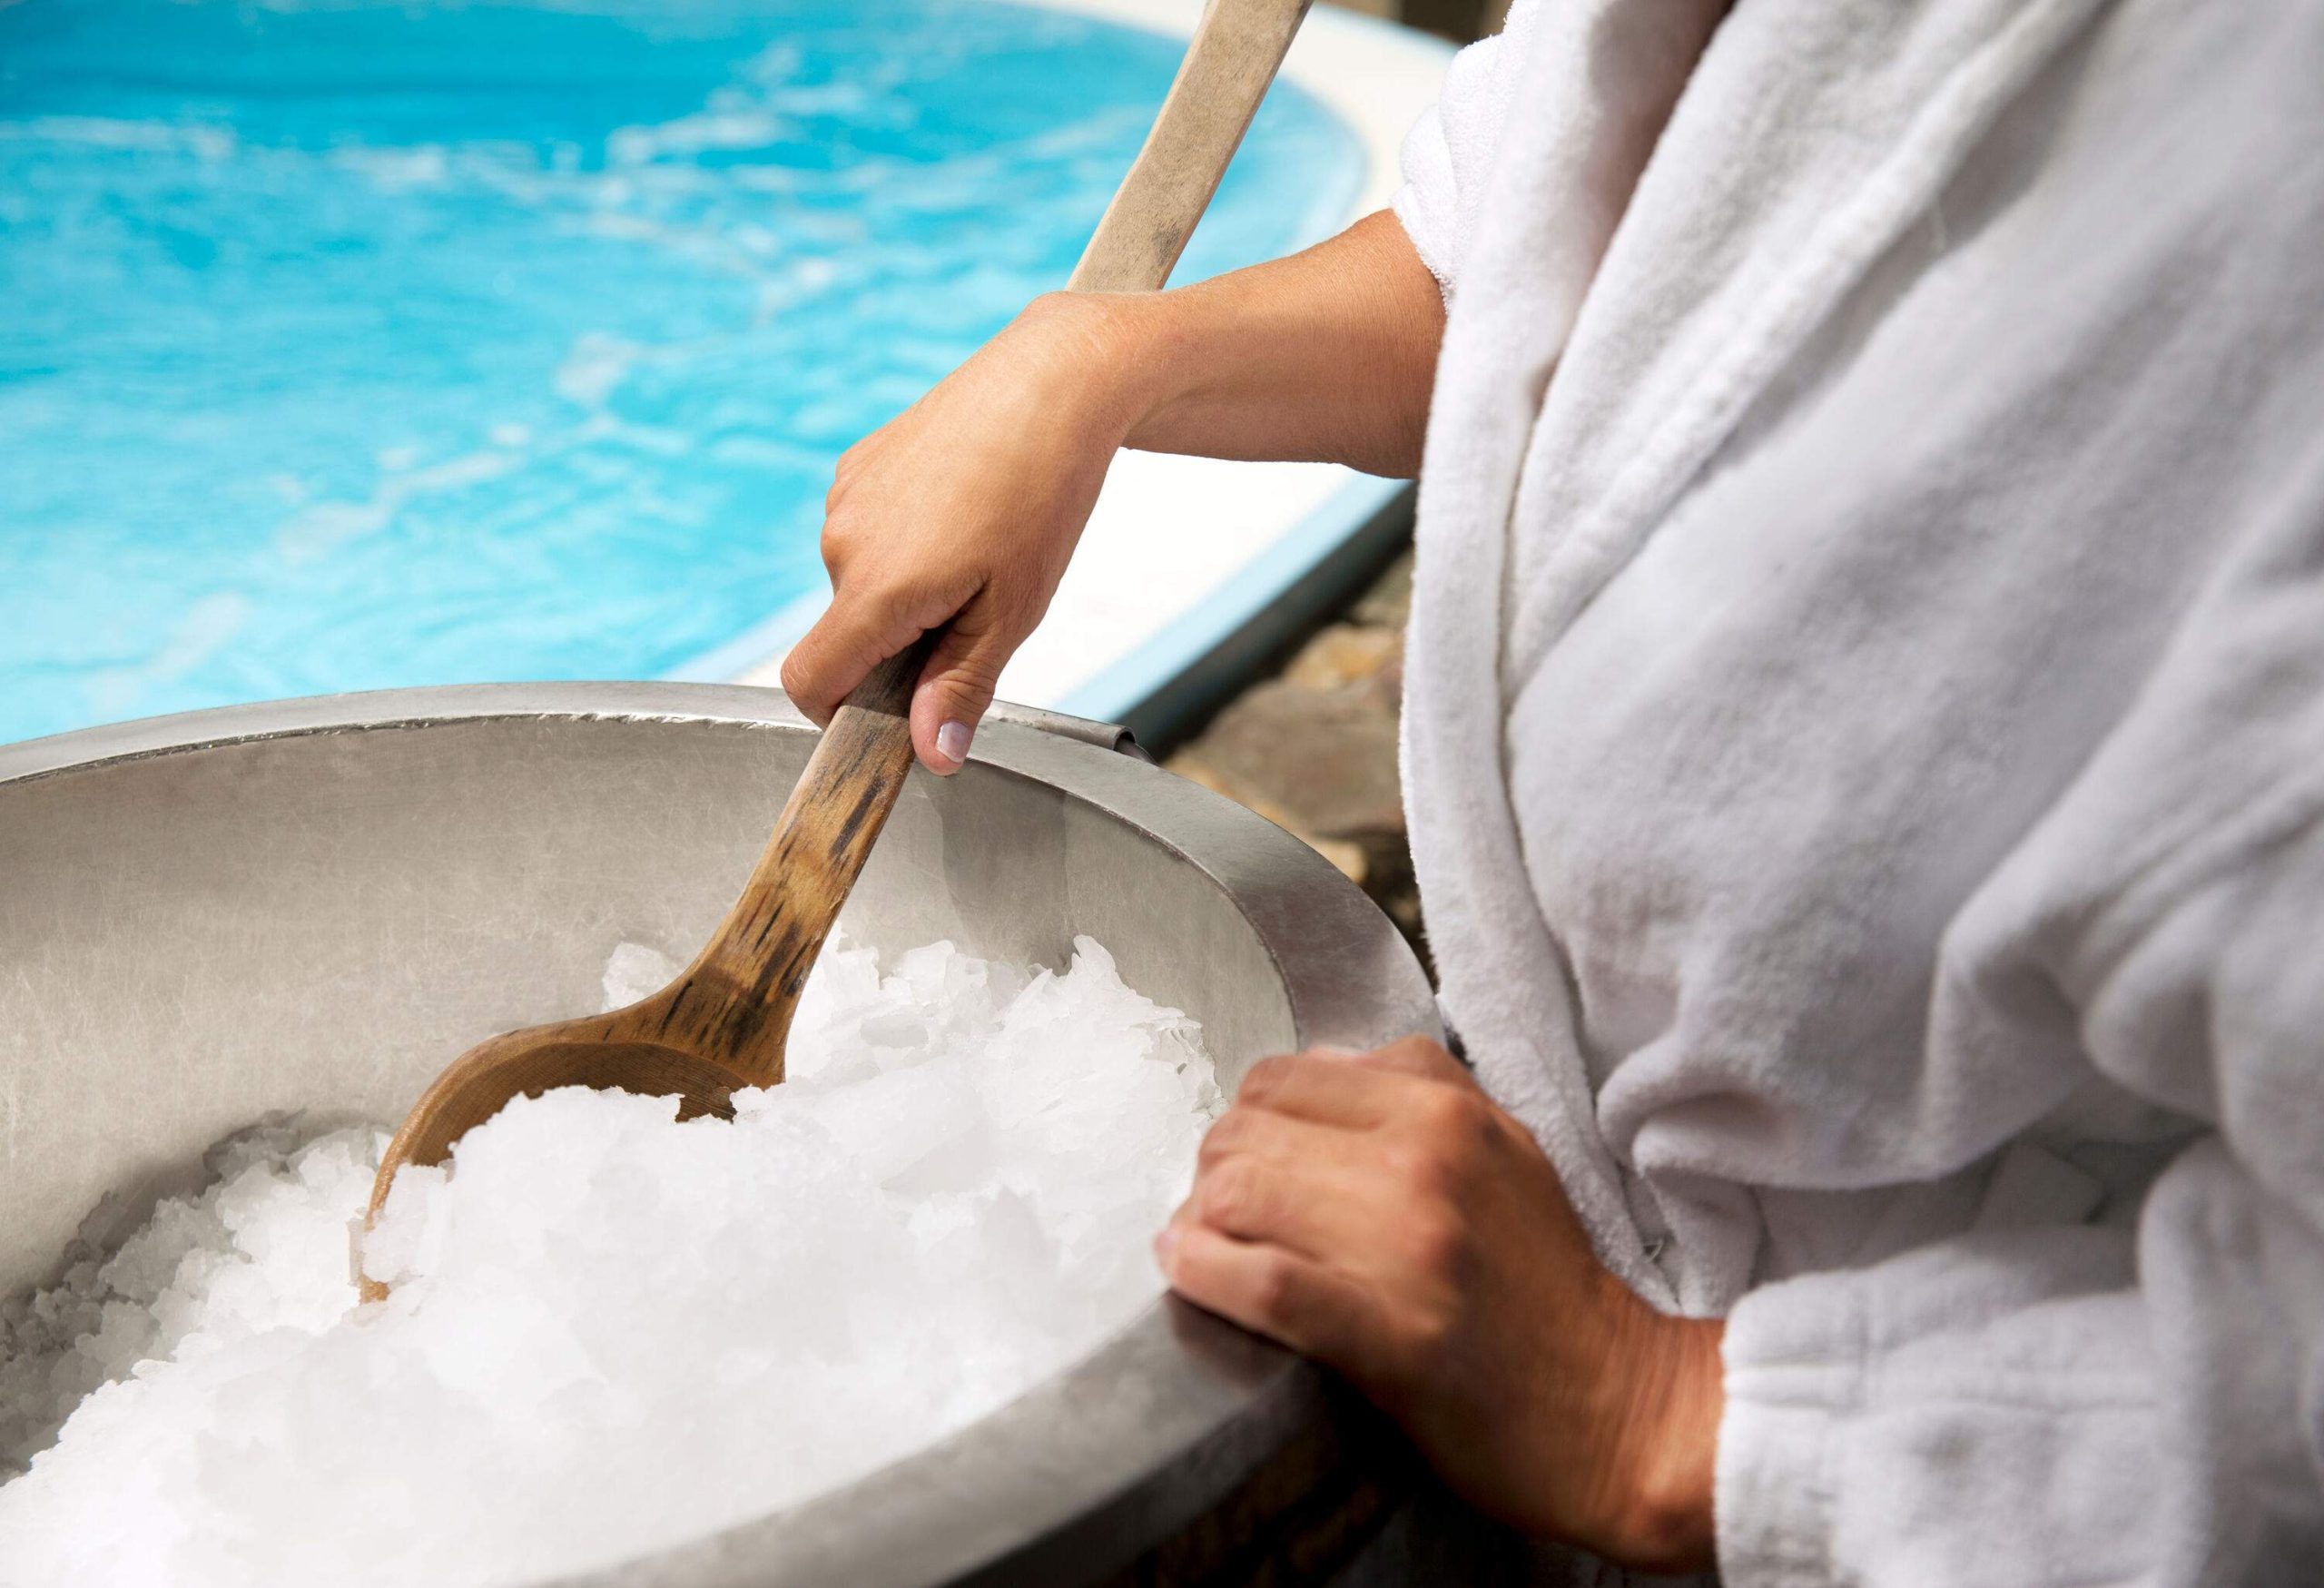 A hand scooping ice from a bucket using a wooden spoon on a poolside.